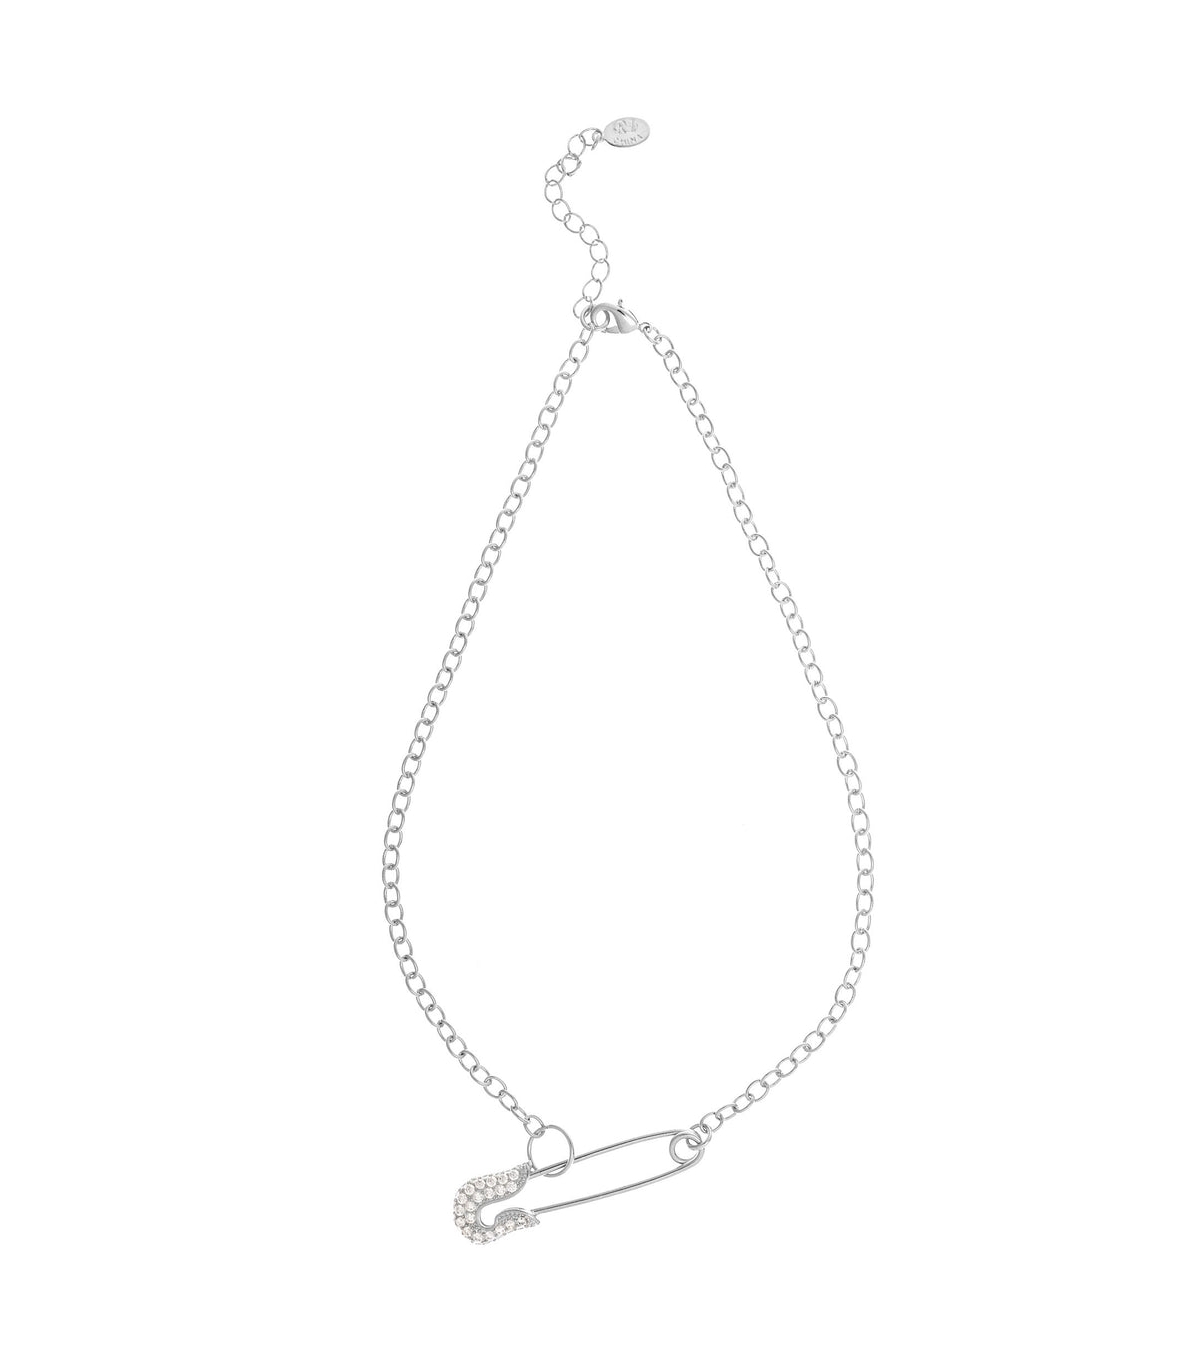 Rhodium Cubic Zirconia Encrusted Safety Pin Chain Necklace - Silver with clear cz